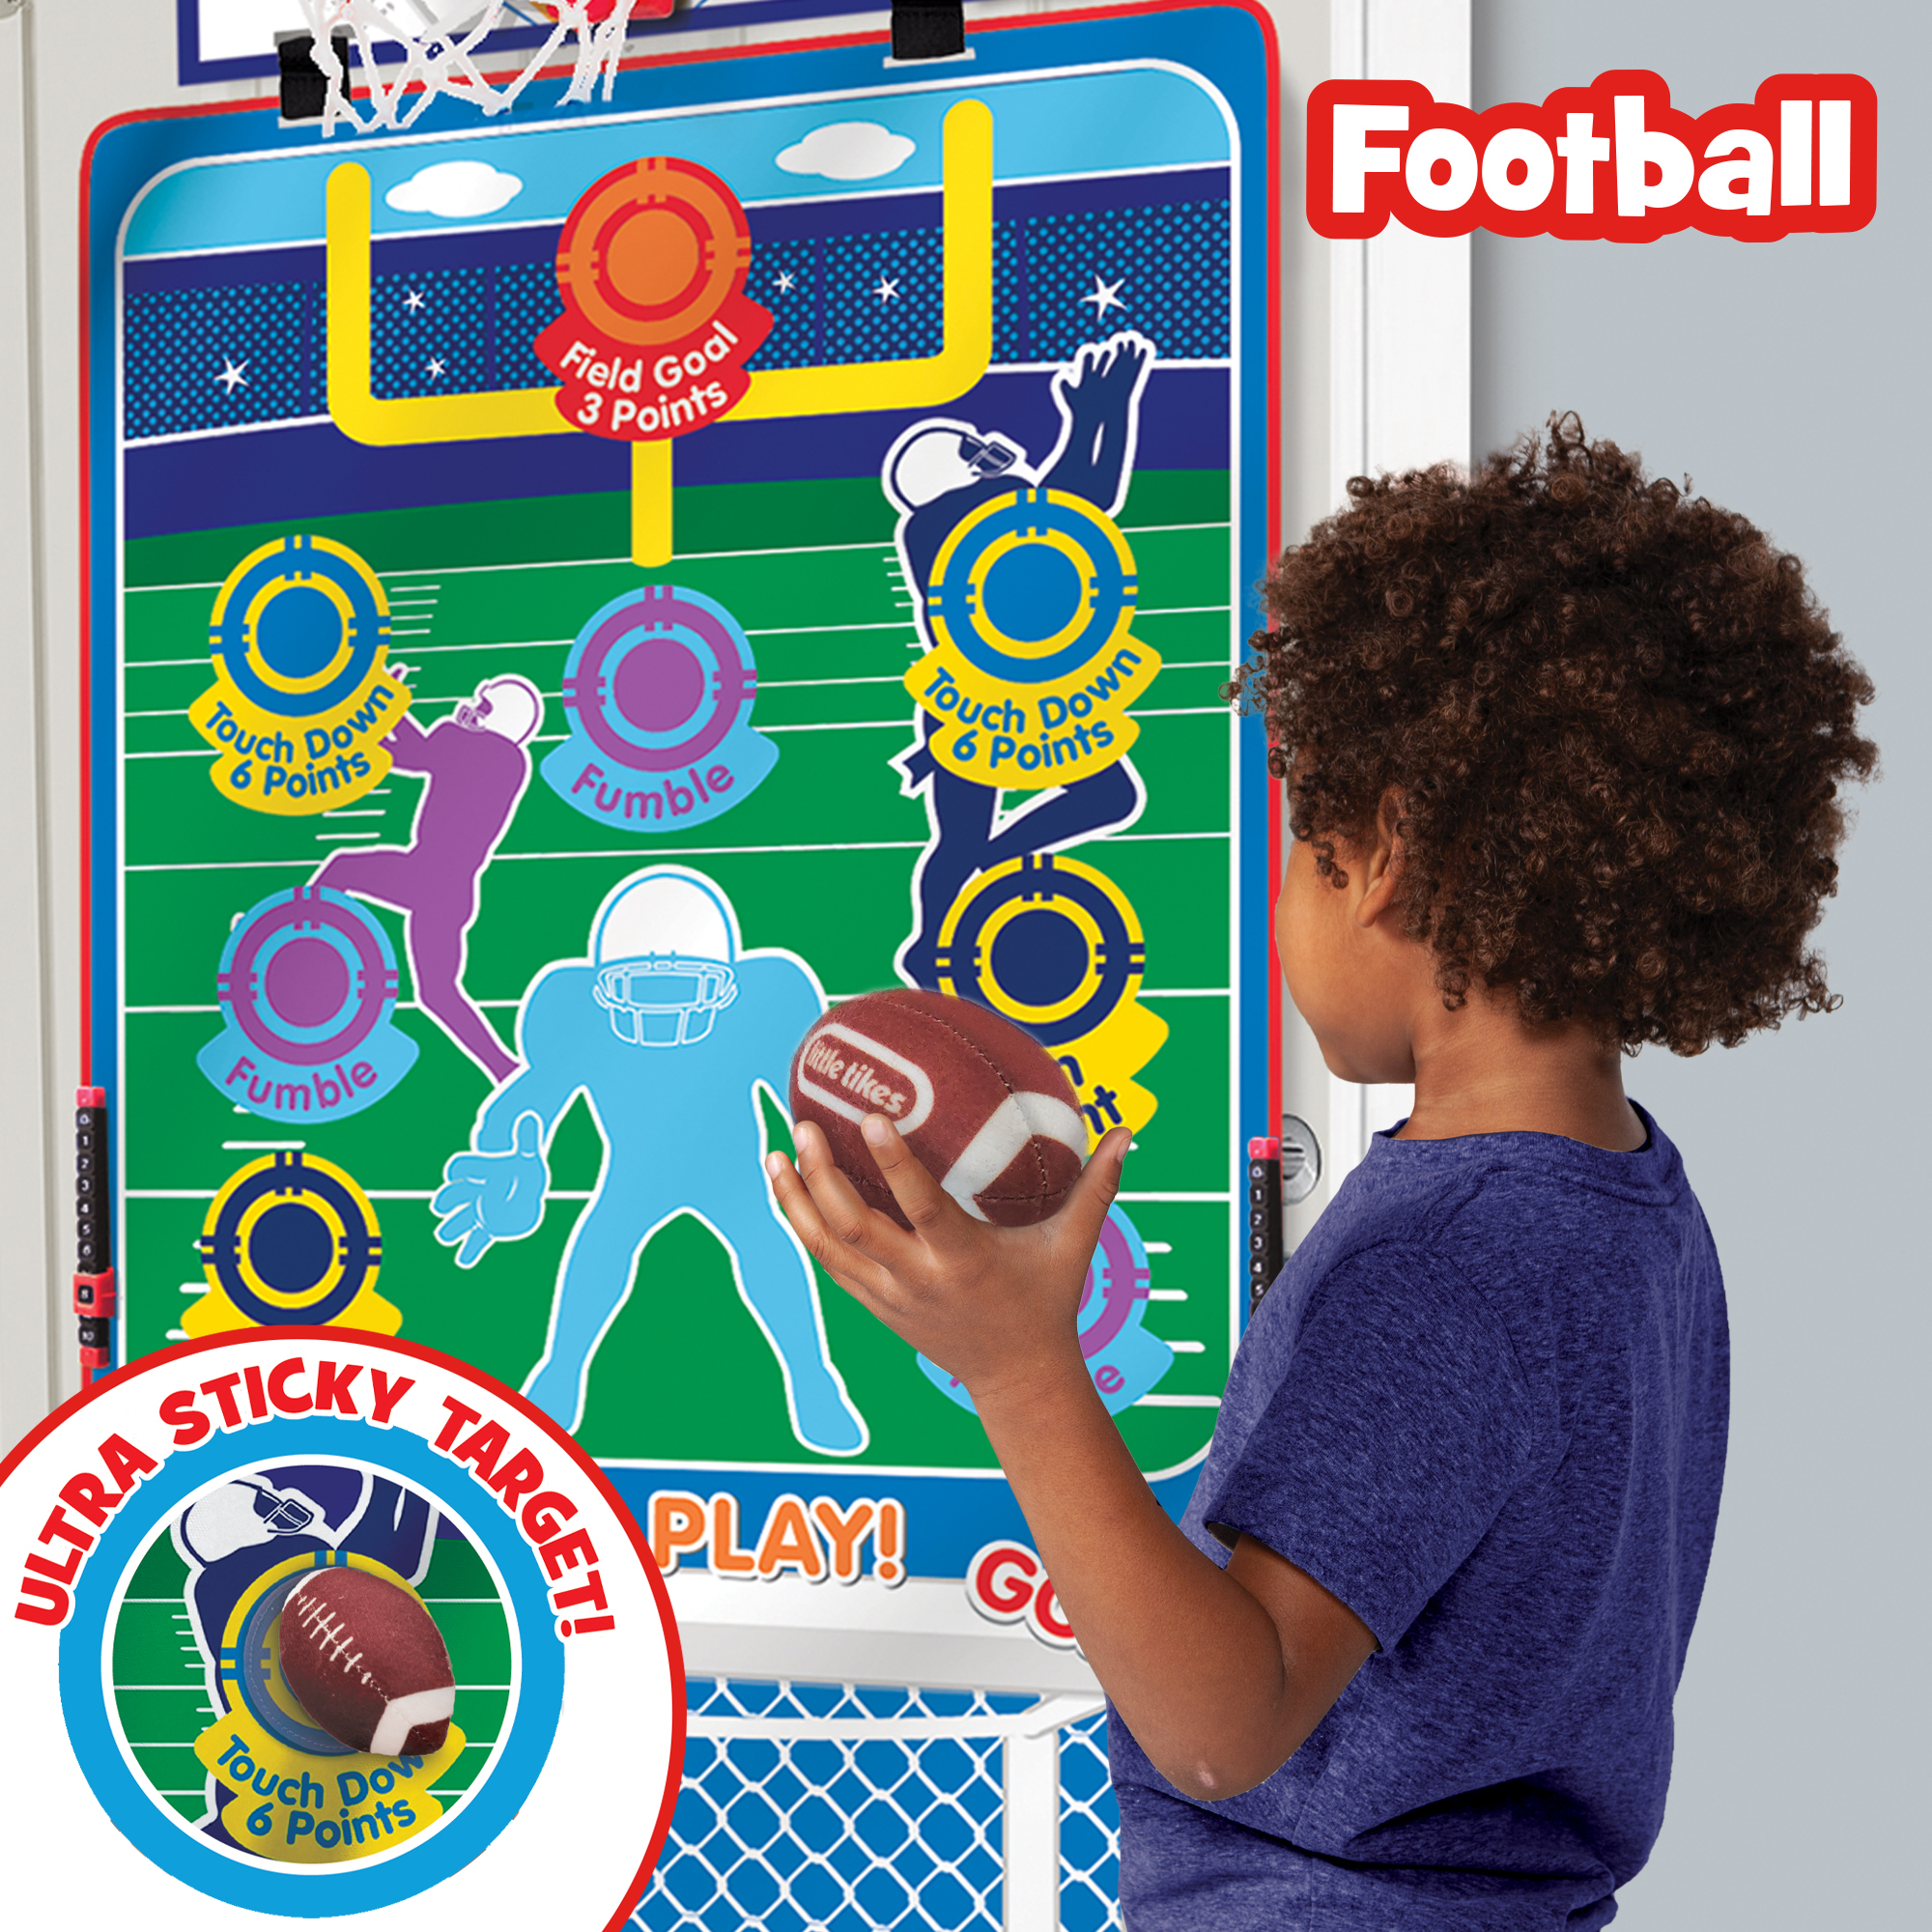 Little Tikes 3-in-1 Doorway Sports Center - Basketball, Football, Soccer for Kids 3+ - image 3 of 5